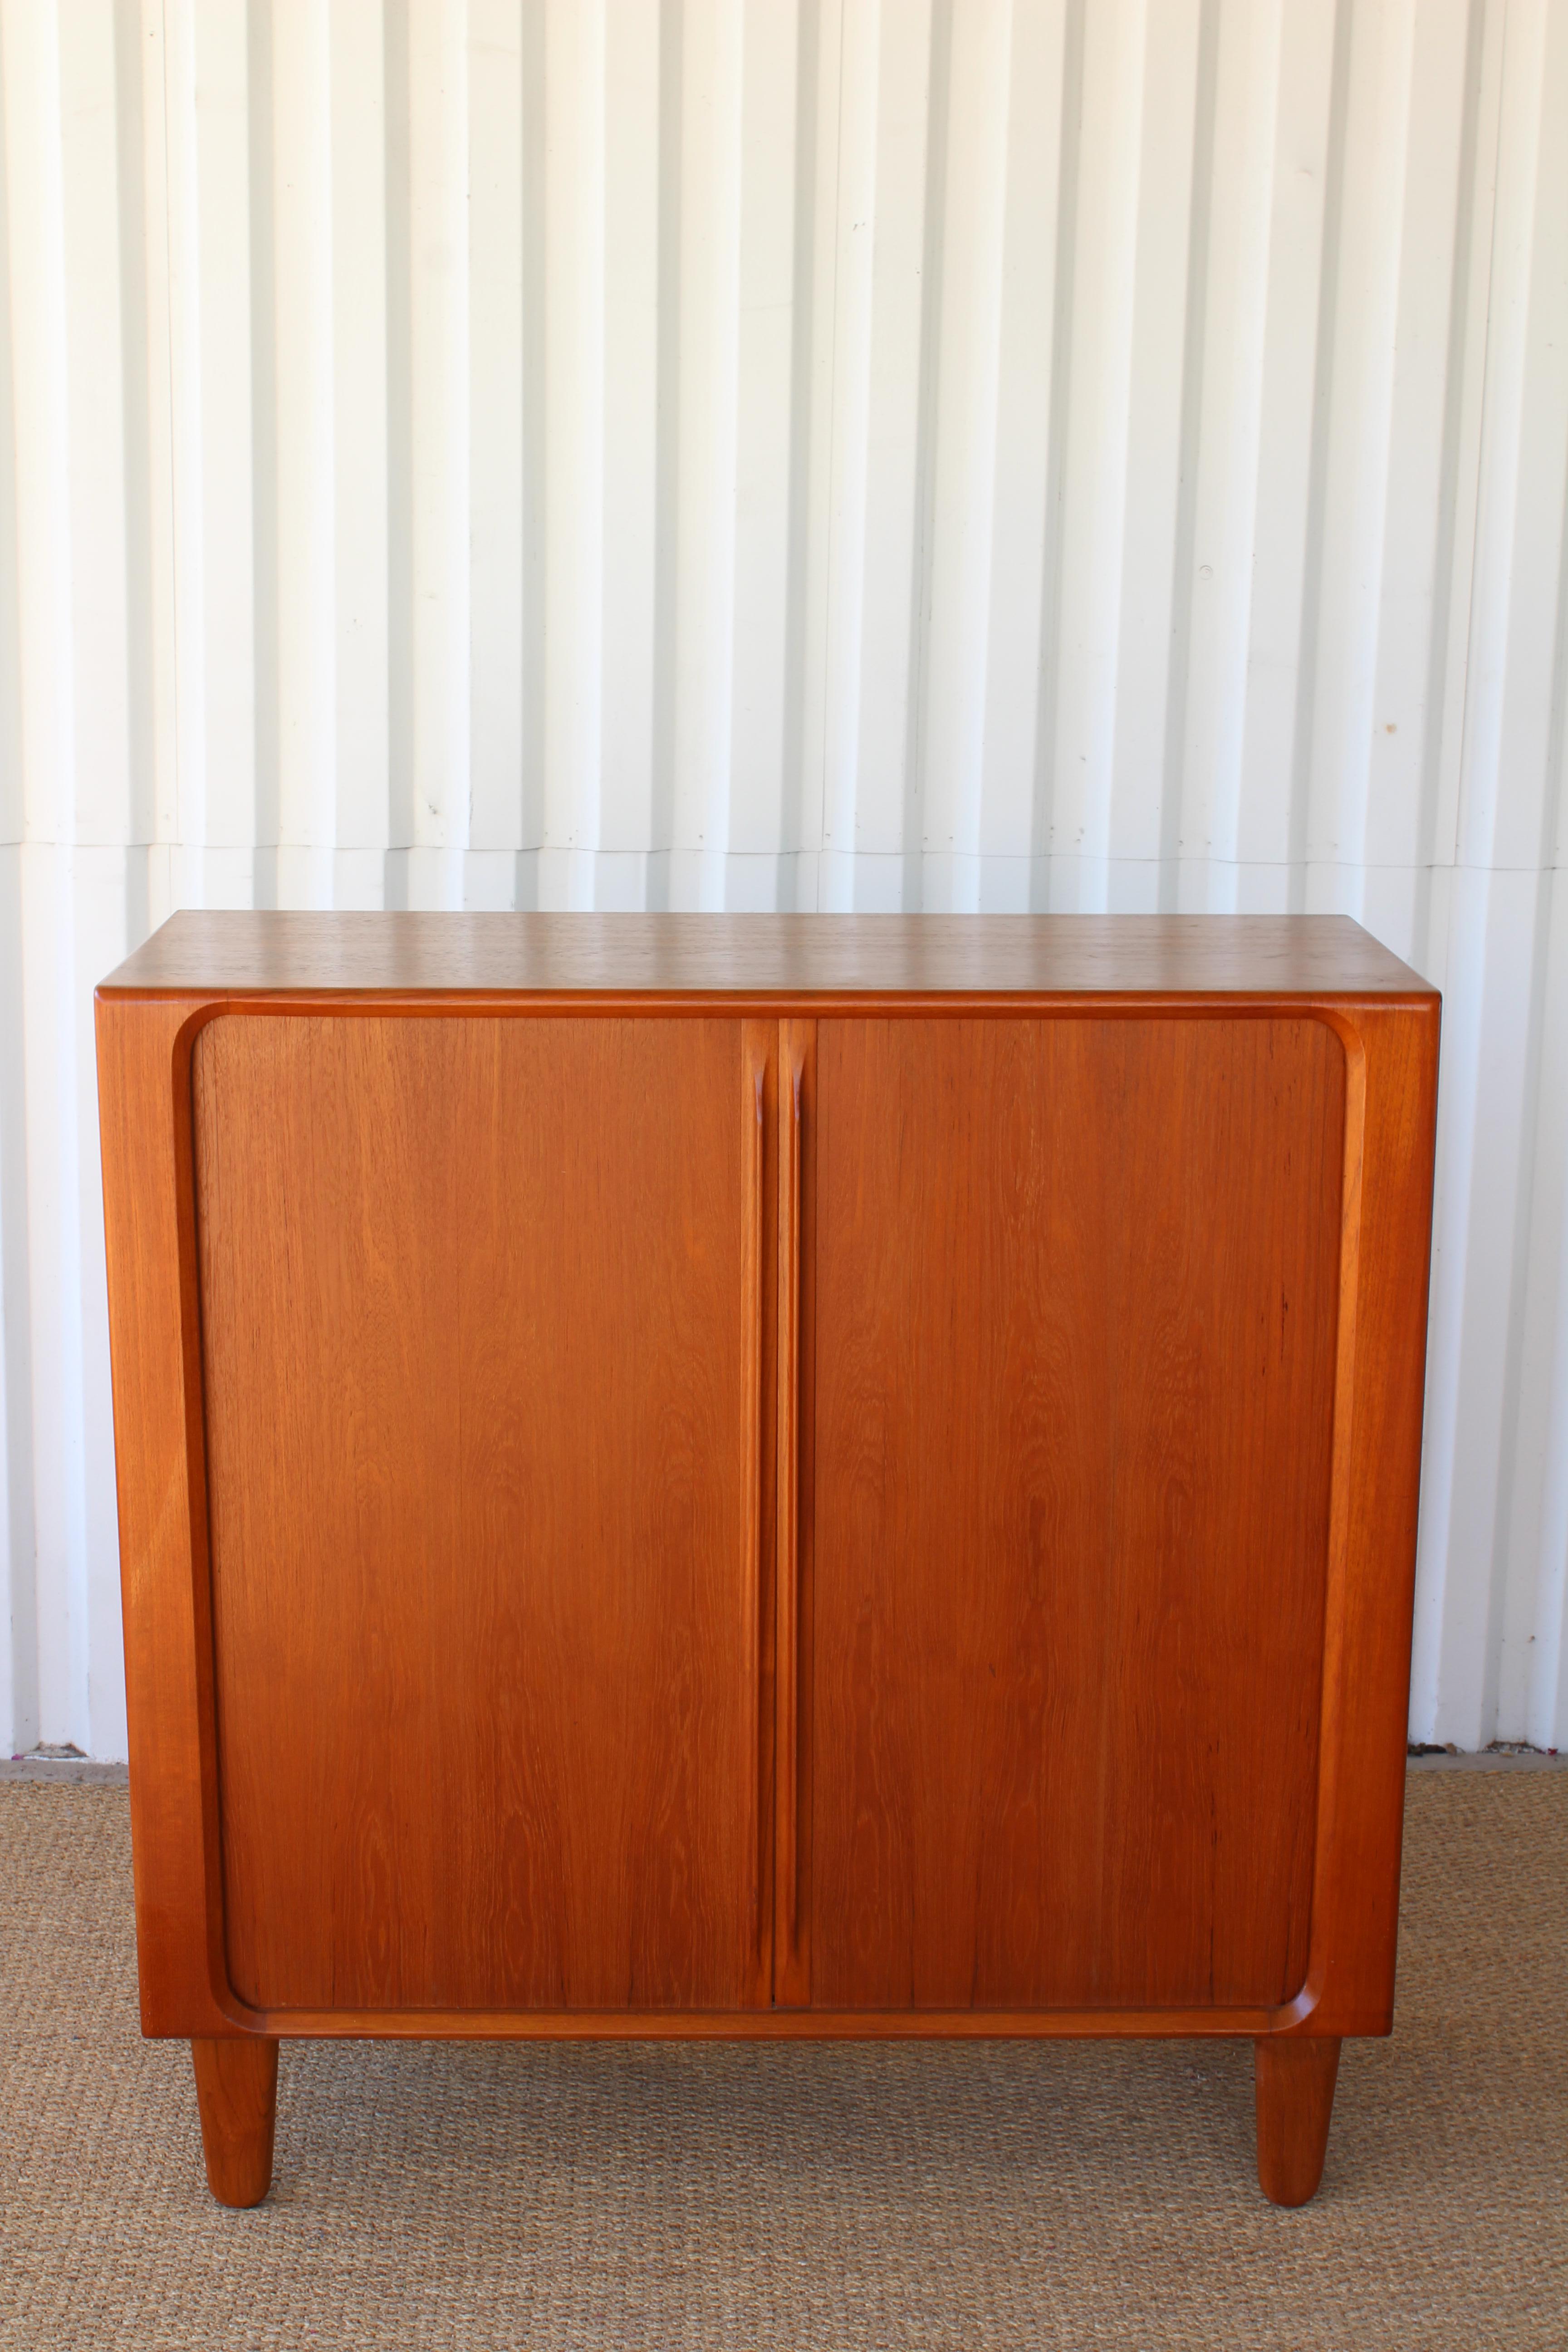 Danish modern solid teak highboy gentleman's dresser by Bernhard Pederson & Son from the 1960s. In excellent condition and recently refinished. Exceptional craftsmanship throughout. Features tambour sliding doors, dovetailed drawers, sculpted teak